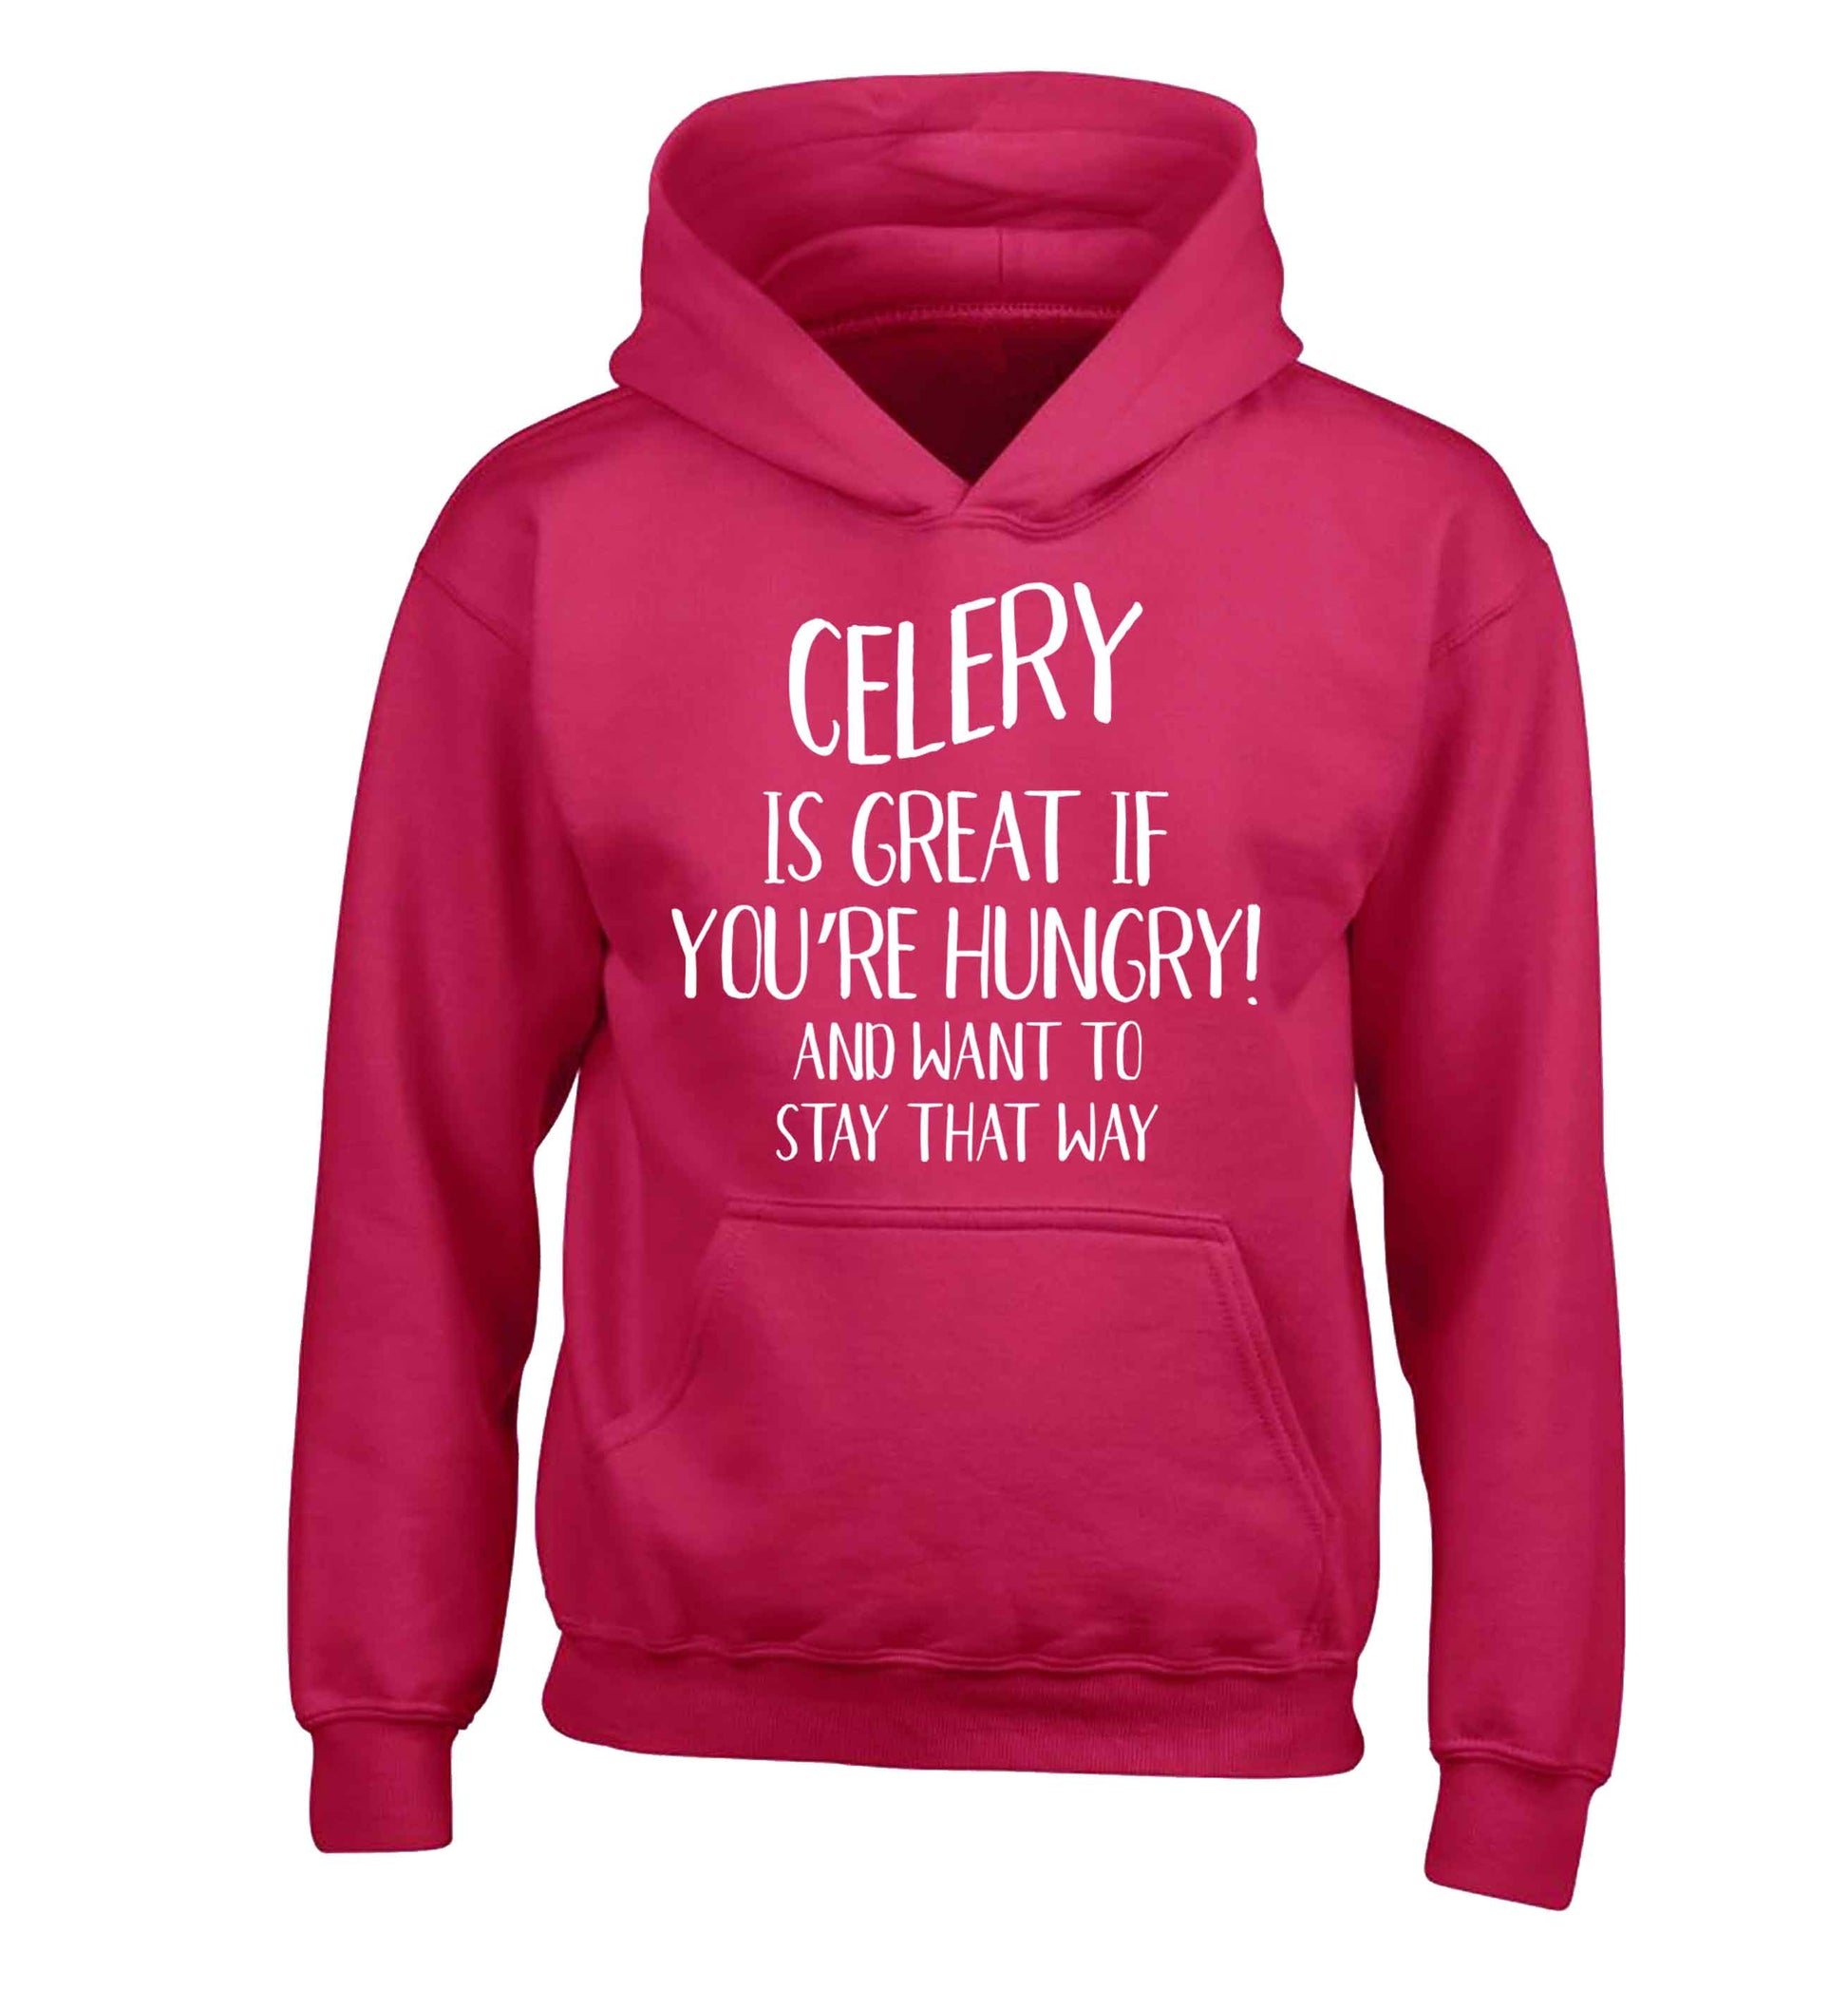 Cellery is great when you're hungry and want to stay that way children's pink hoodie 12-13 Years